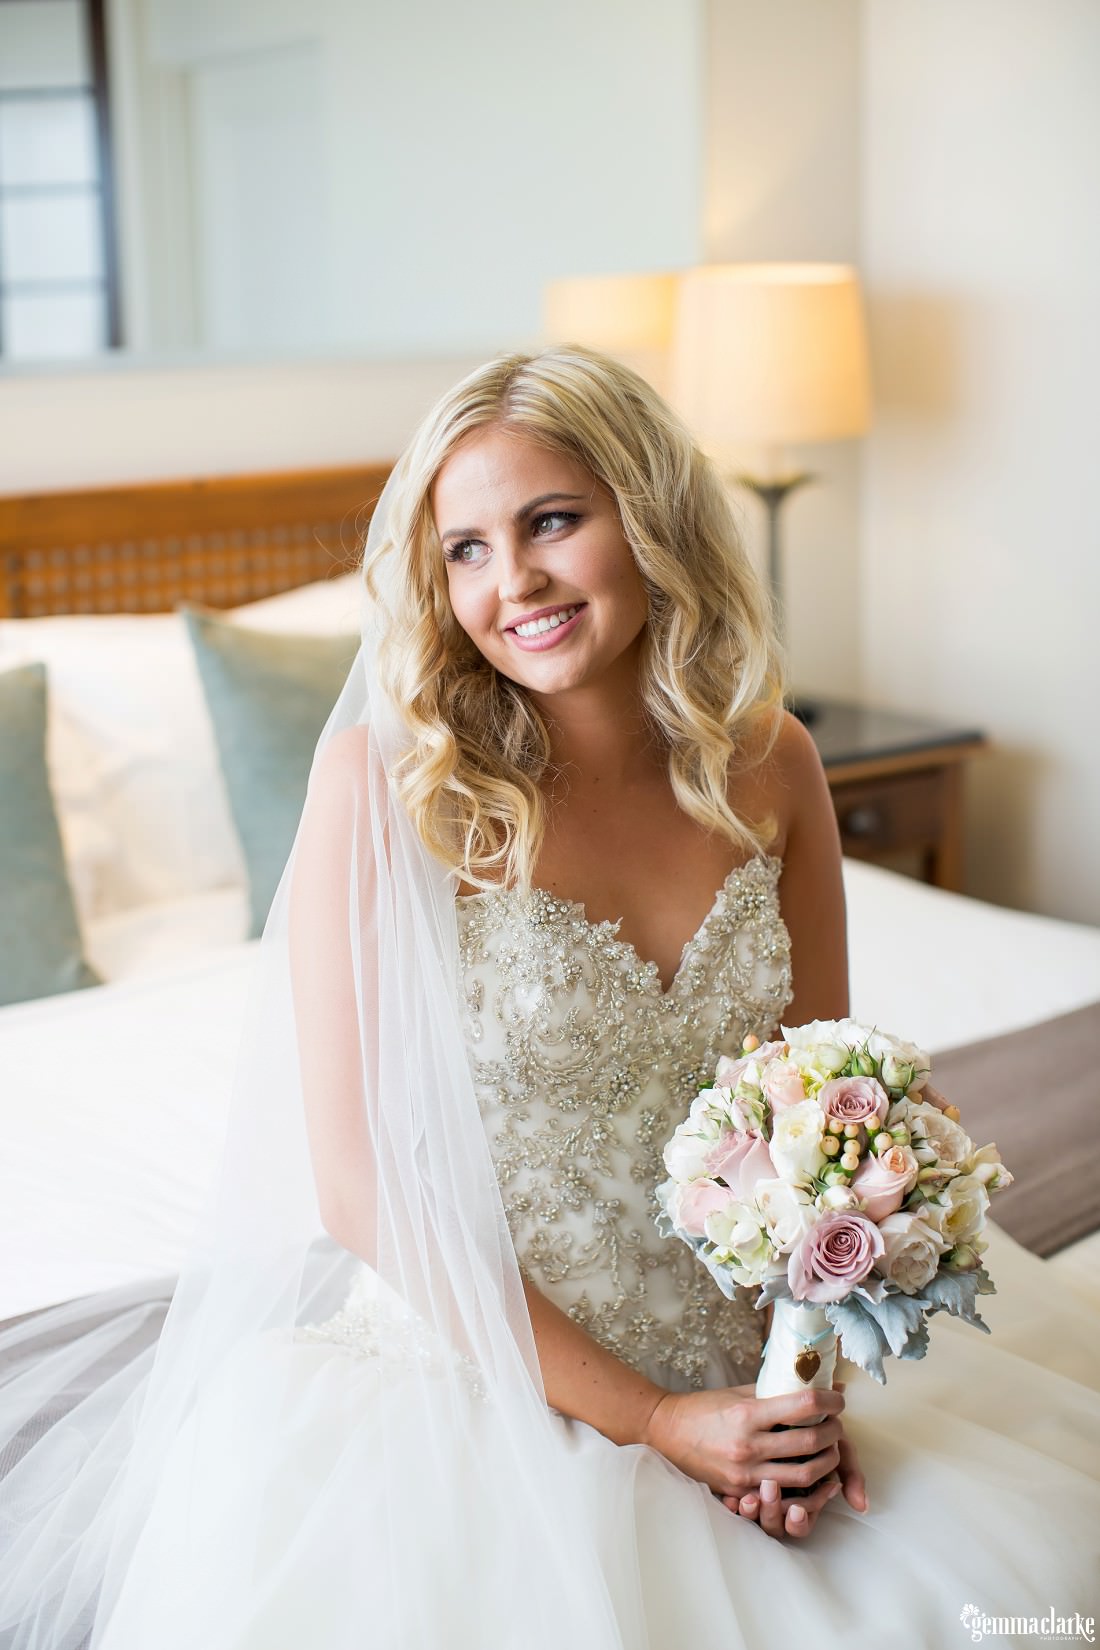 A smiling bride holding her floral bouquet and sitting on the end of a bed